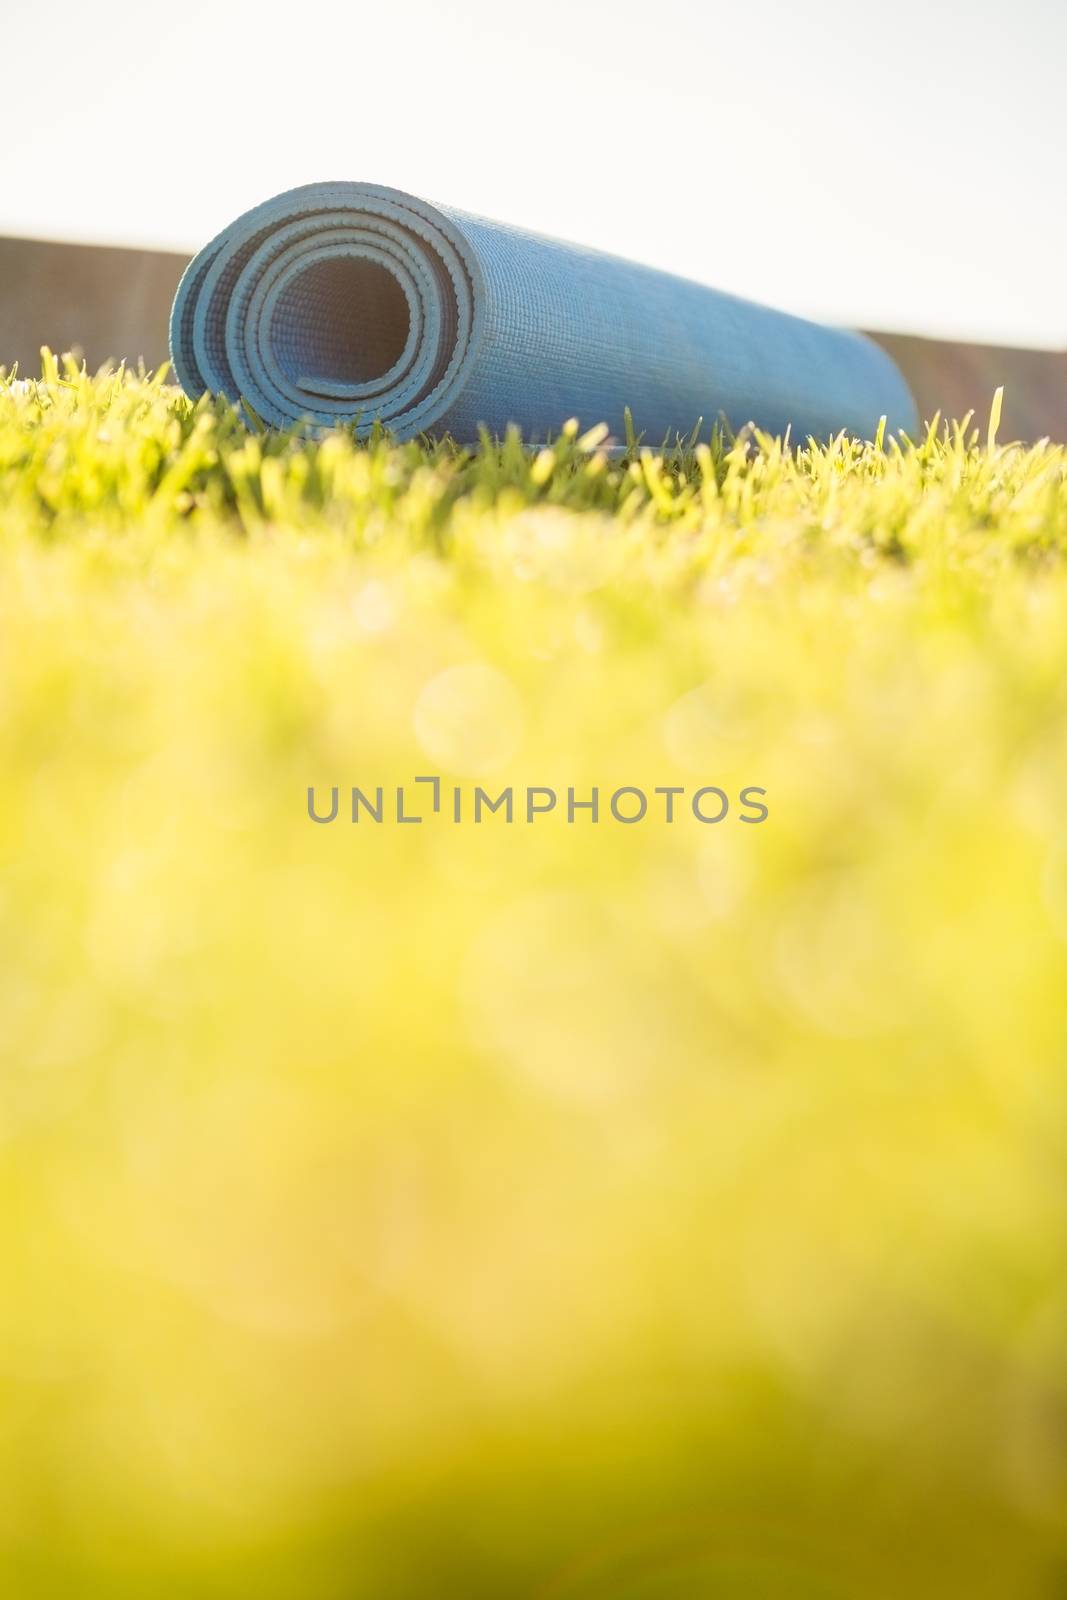 Exercise mat lying on the grass at promenade